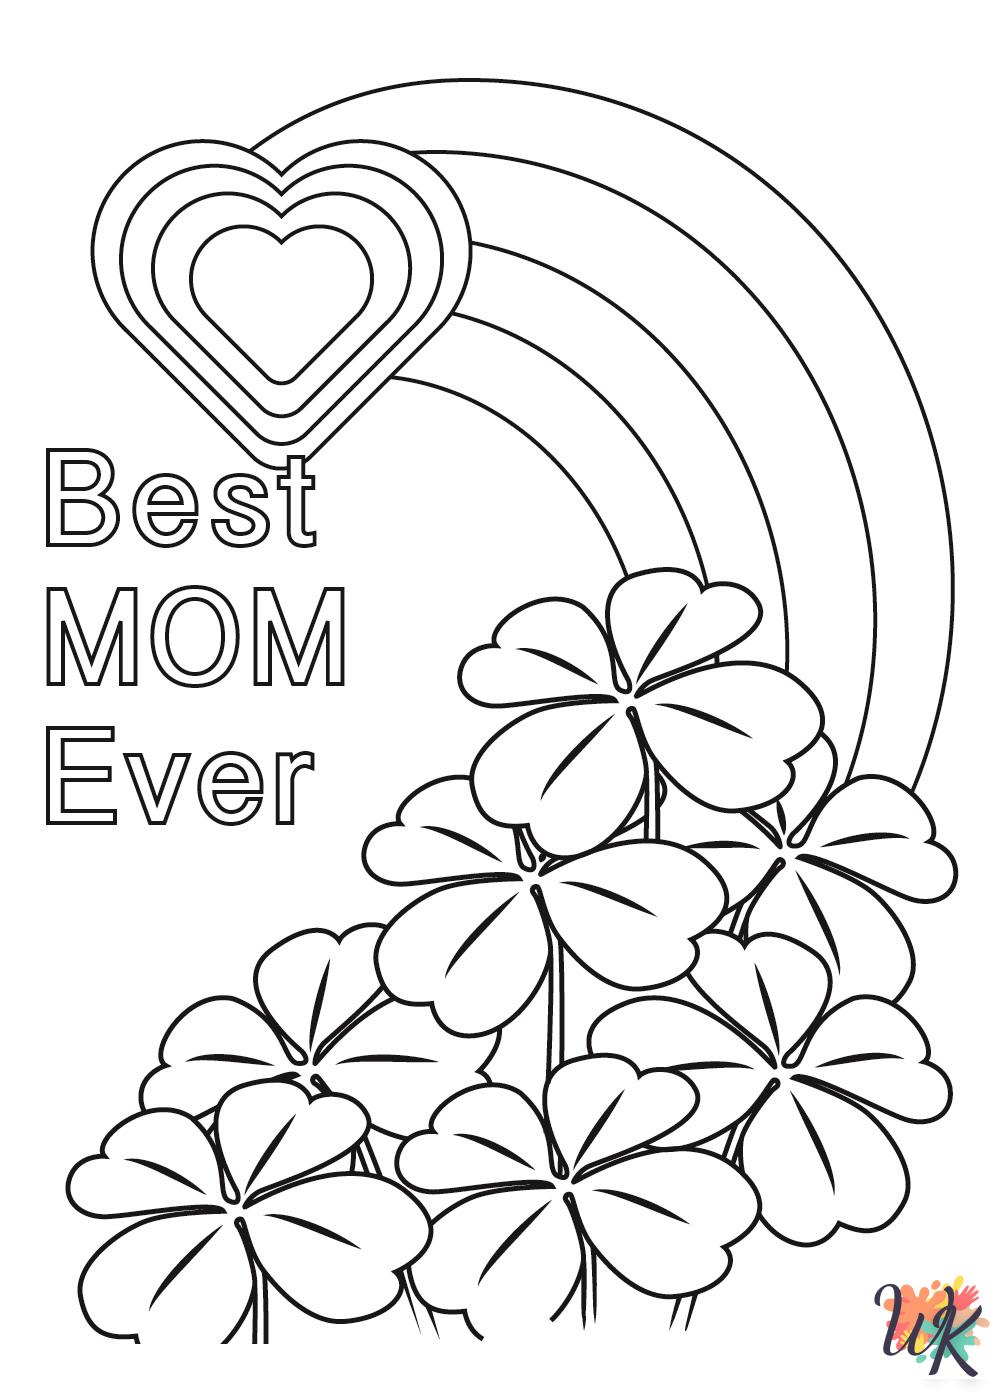 Mother’s day coloring pages for adults